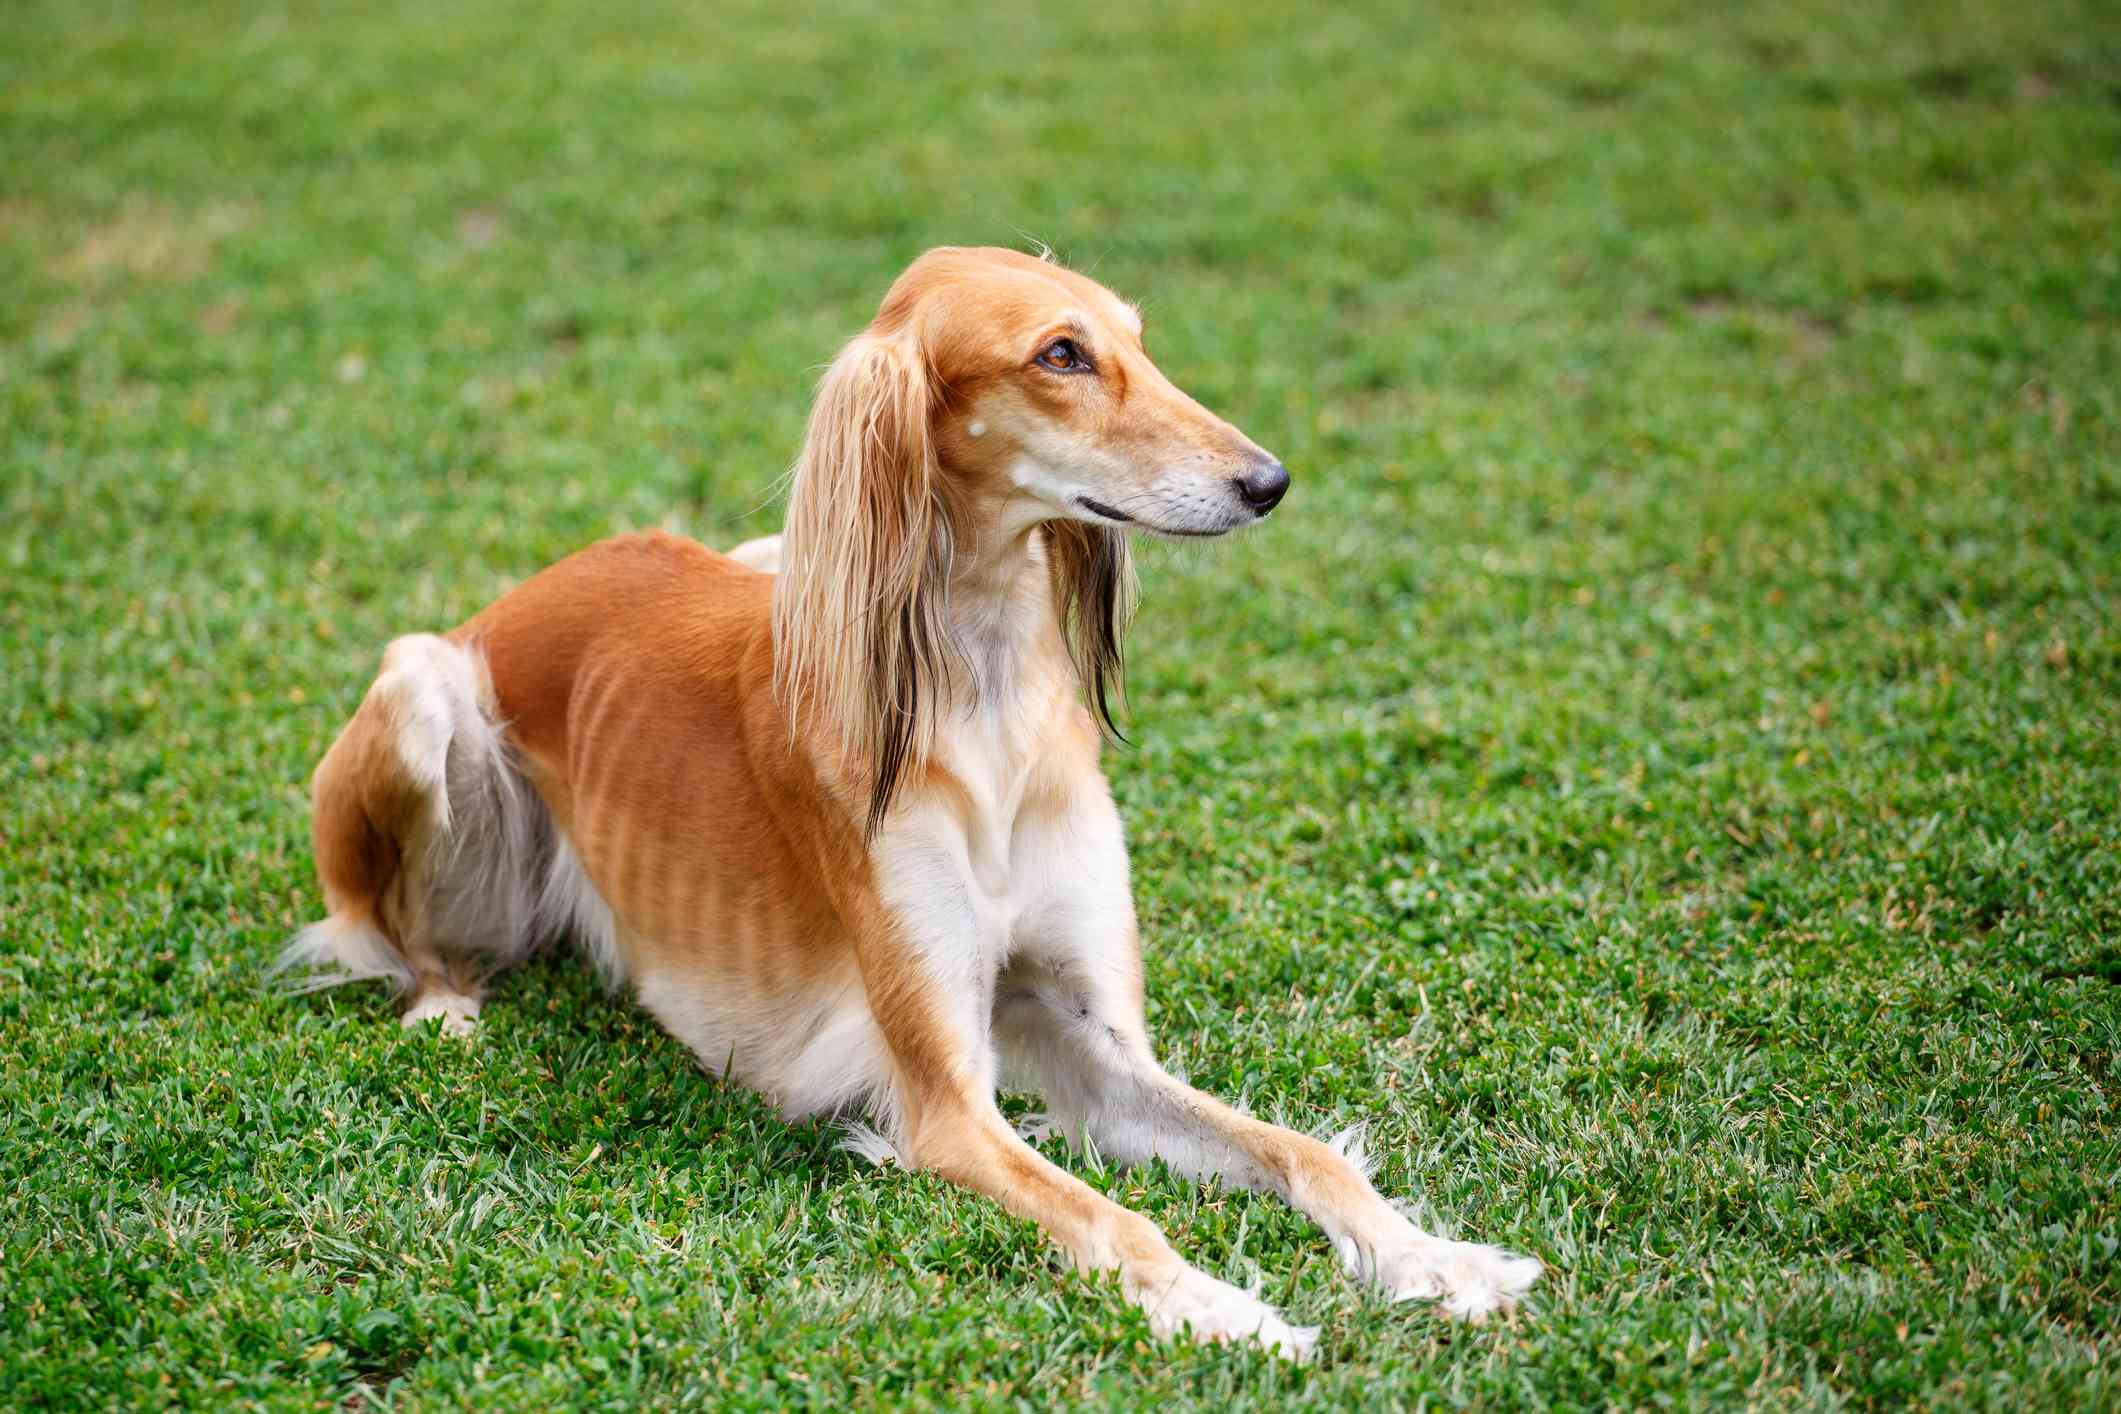 A fawn-colored Saluki dog laying in the grass and looking away from the camera.